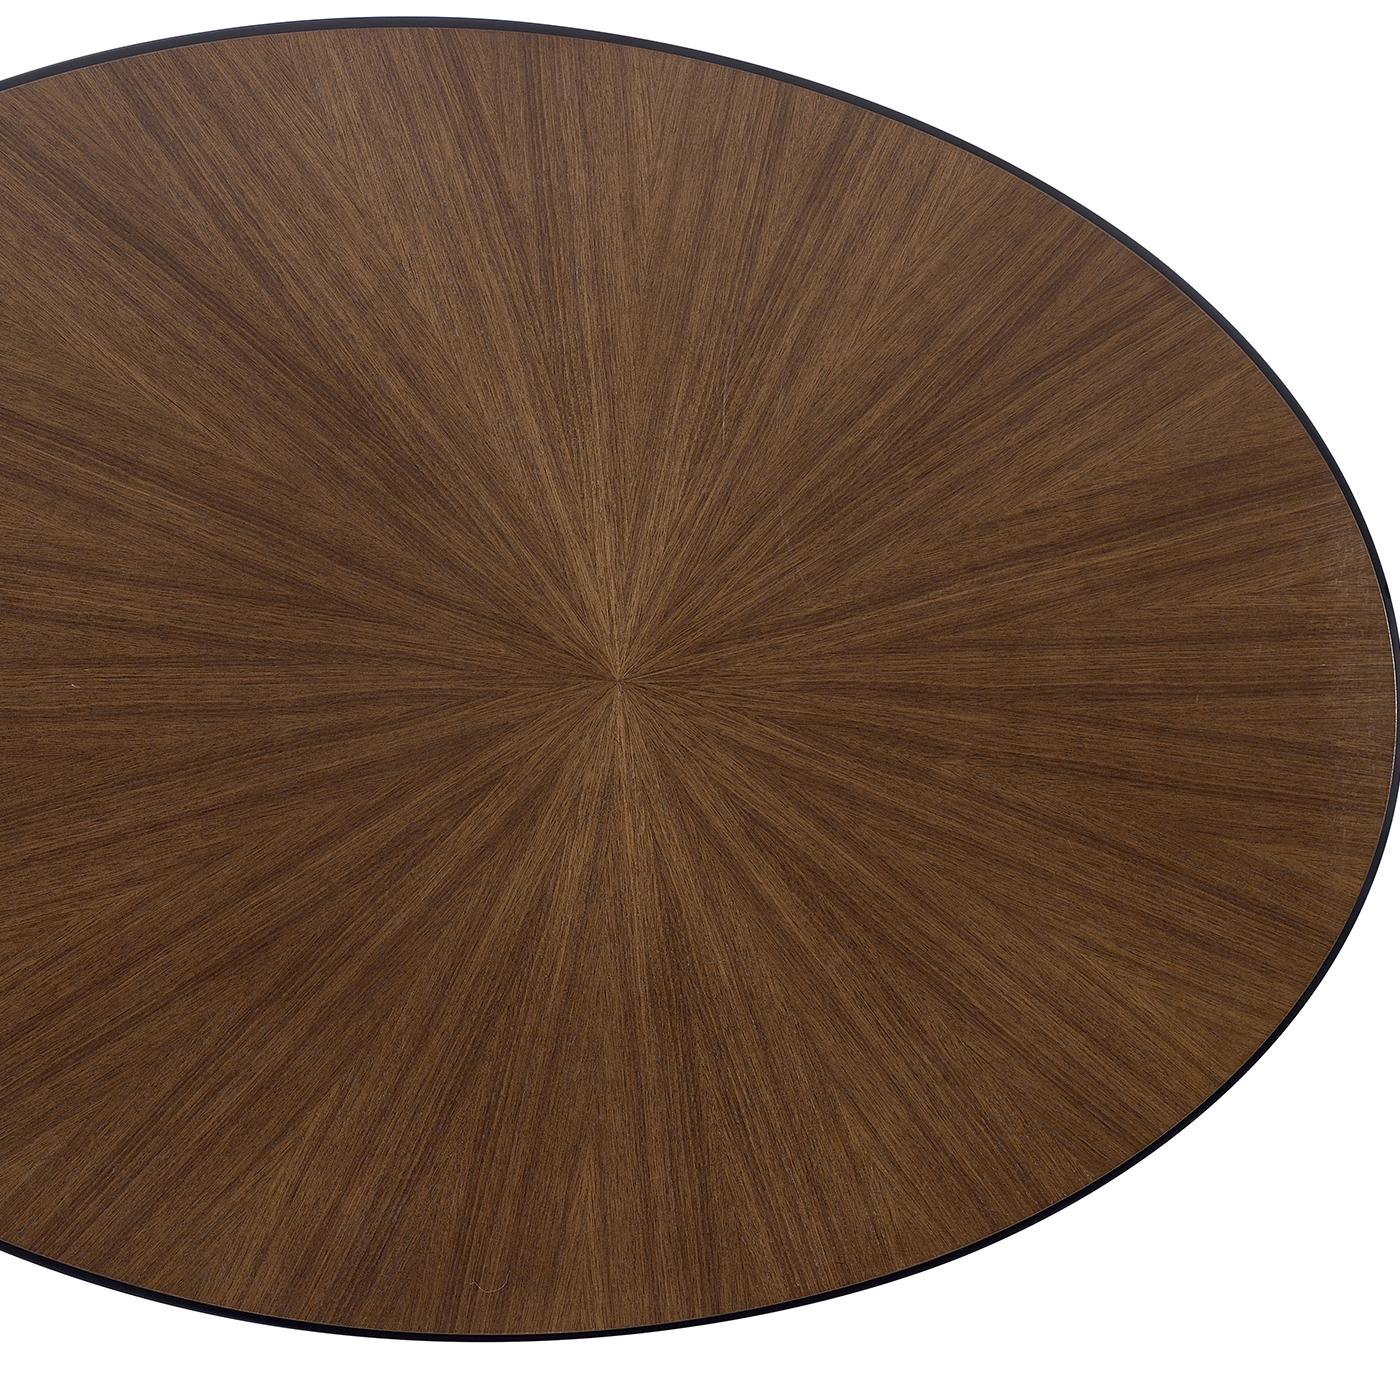 An eclectic and versatile piece of functional decor, this short coffee table boasts a symmetric silhouette marked by an oval base and an oval top. The structure is crafted of open-pore black lacquered plywood and ash-veneered MDF and is enriched